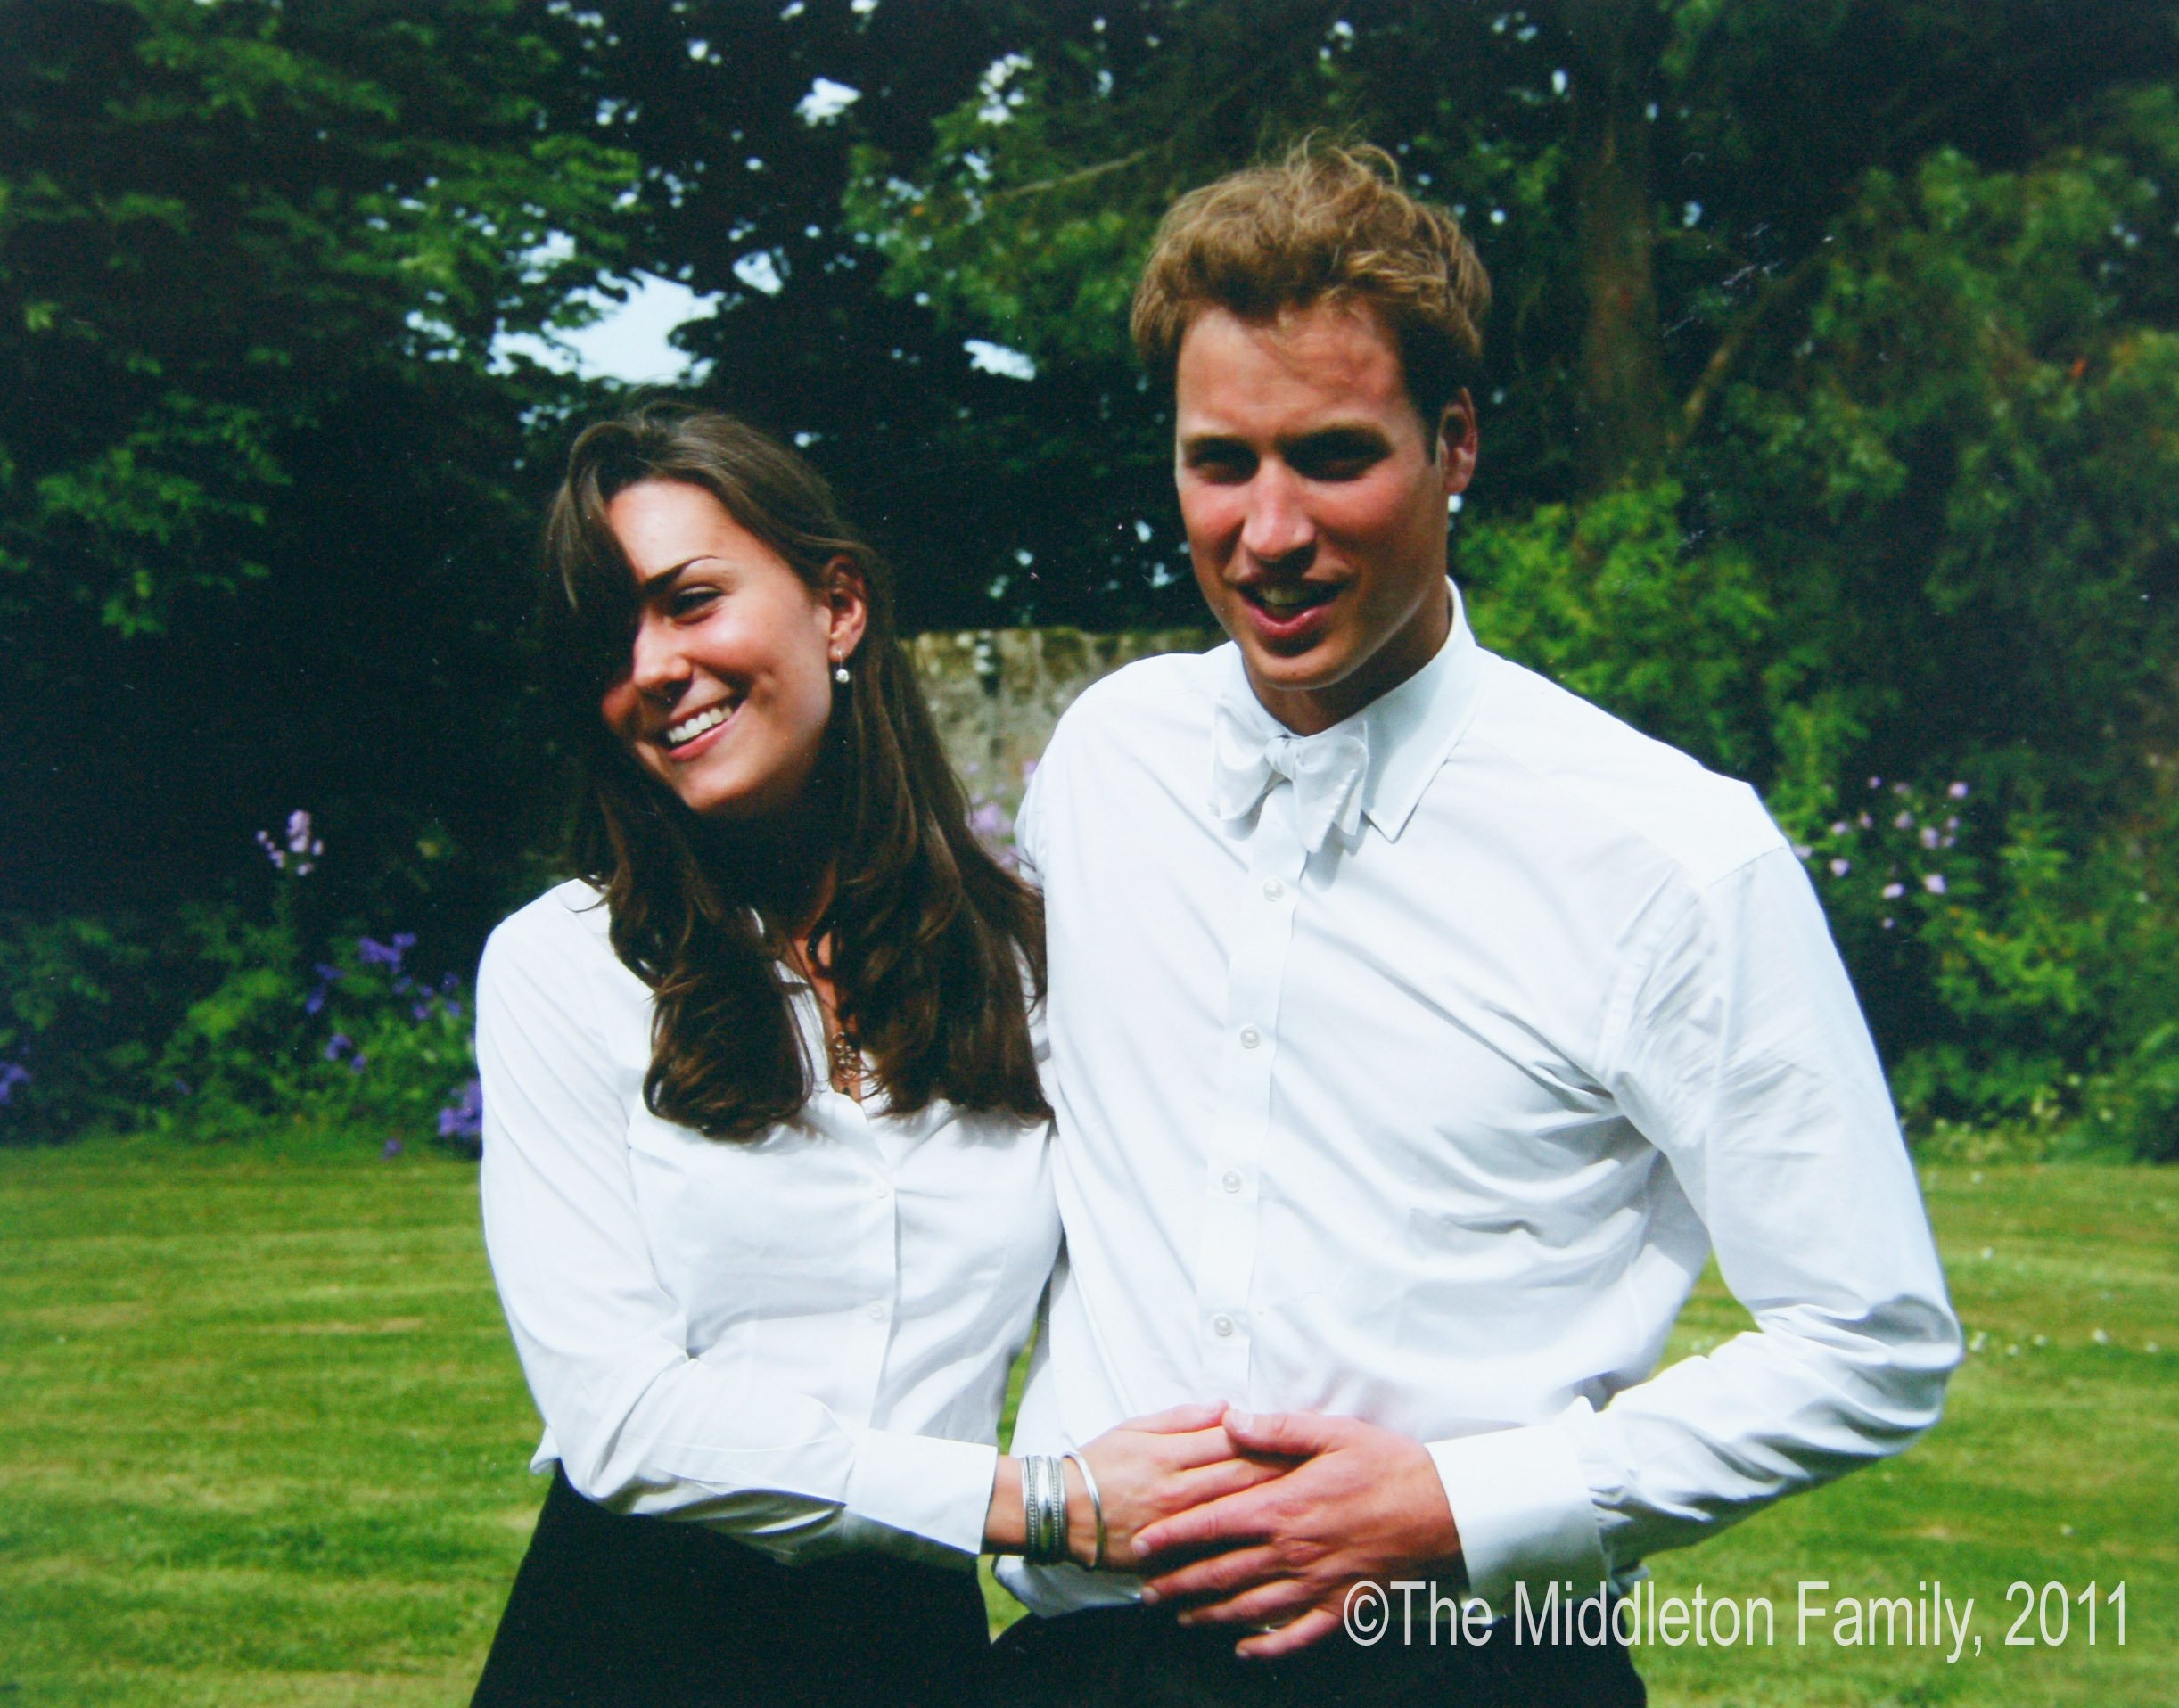 Kate Middleton and Prince William on the day of their graduation ceremony at St Andrew's University in St Andrew's on June 23, 2005 in Scotland. / Source: Getty Images